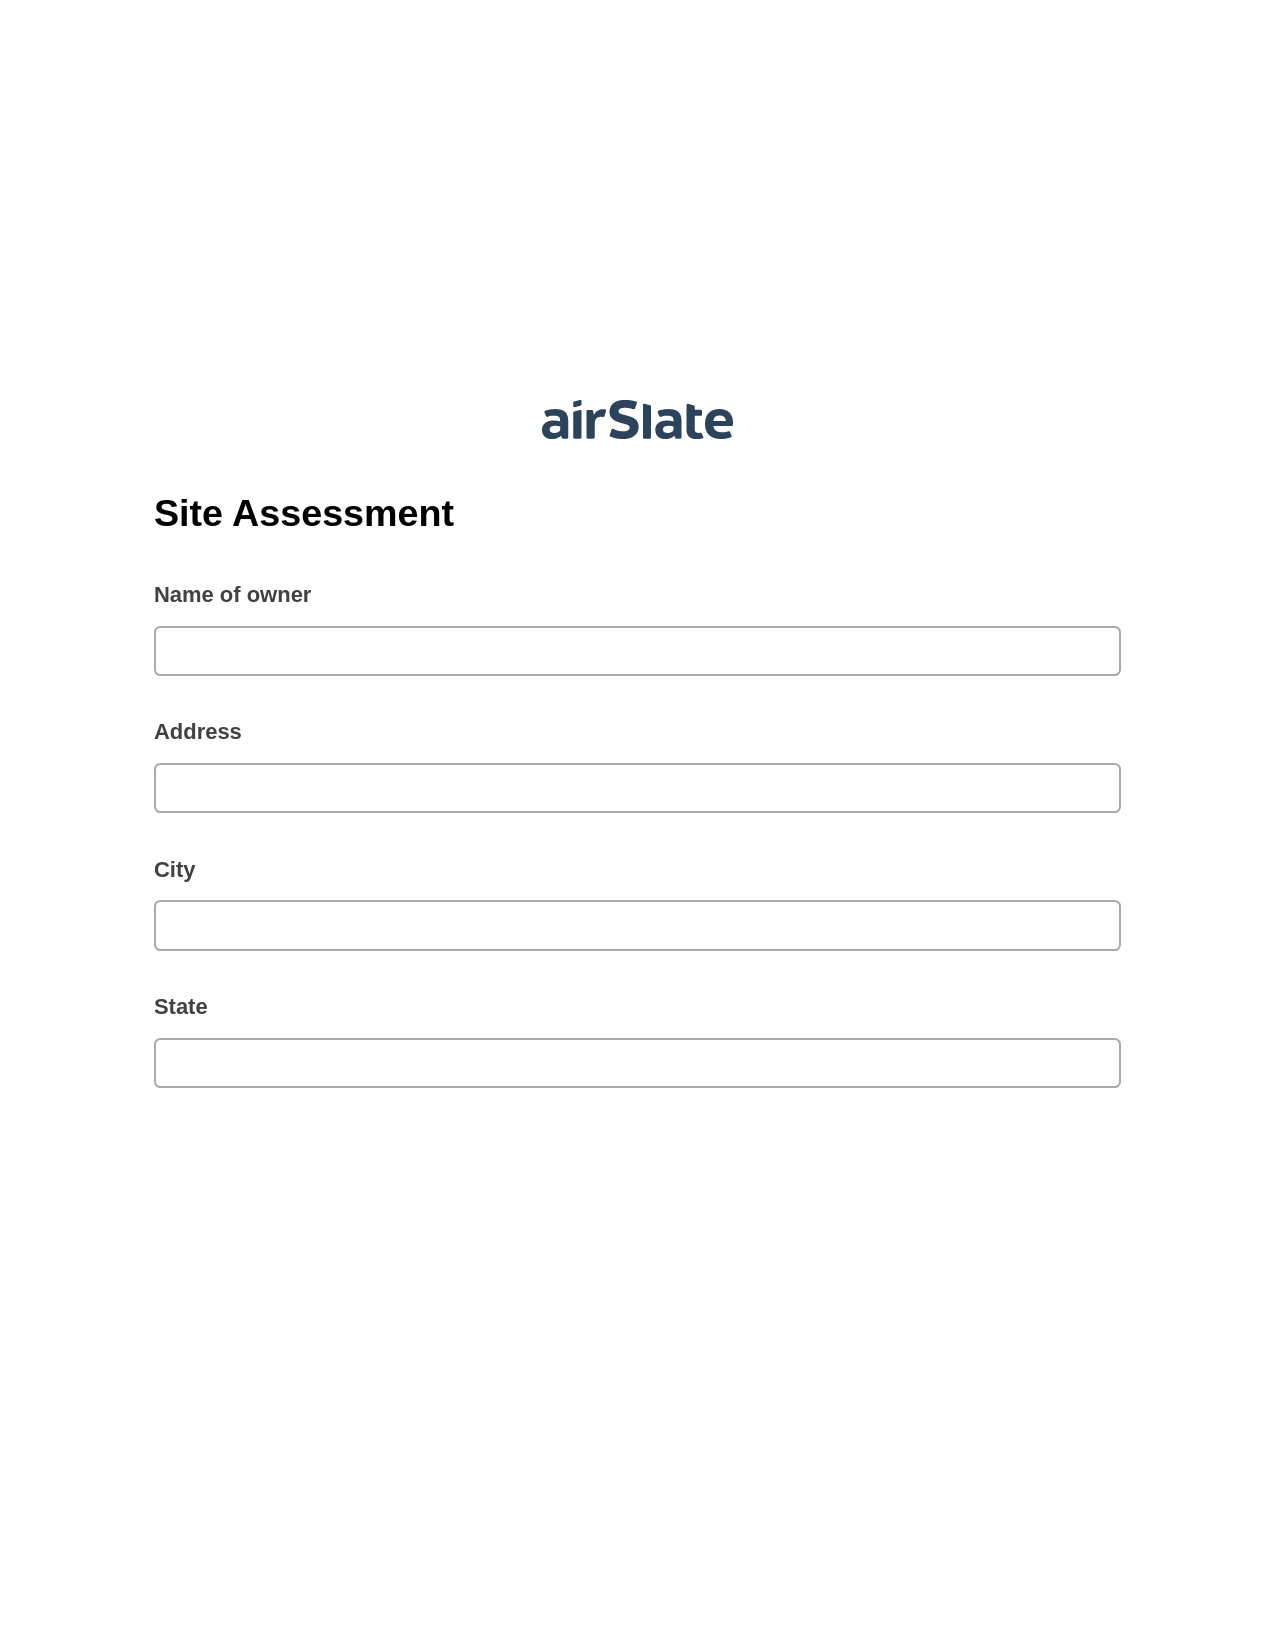 Site Assessment Pre-fill from Salesforce Record Bot, Reminder Bot, Slack Two-Way Binding Bot